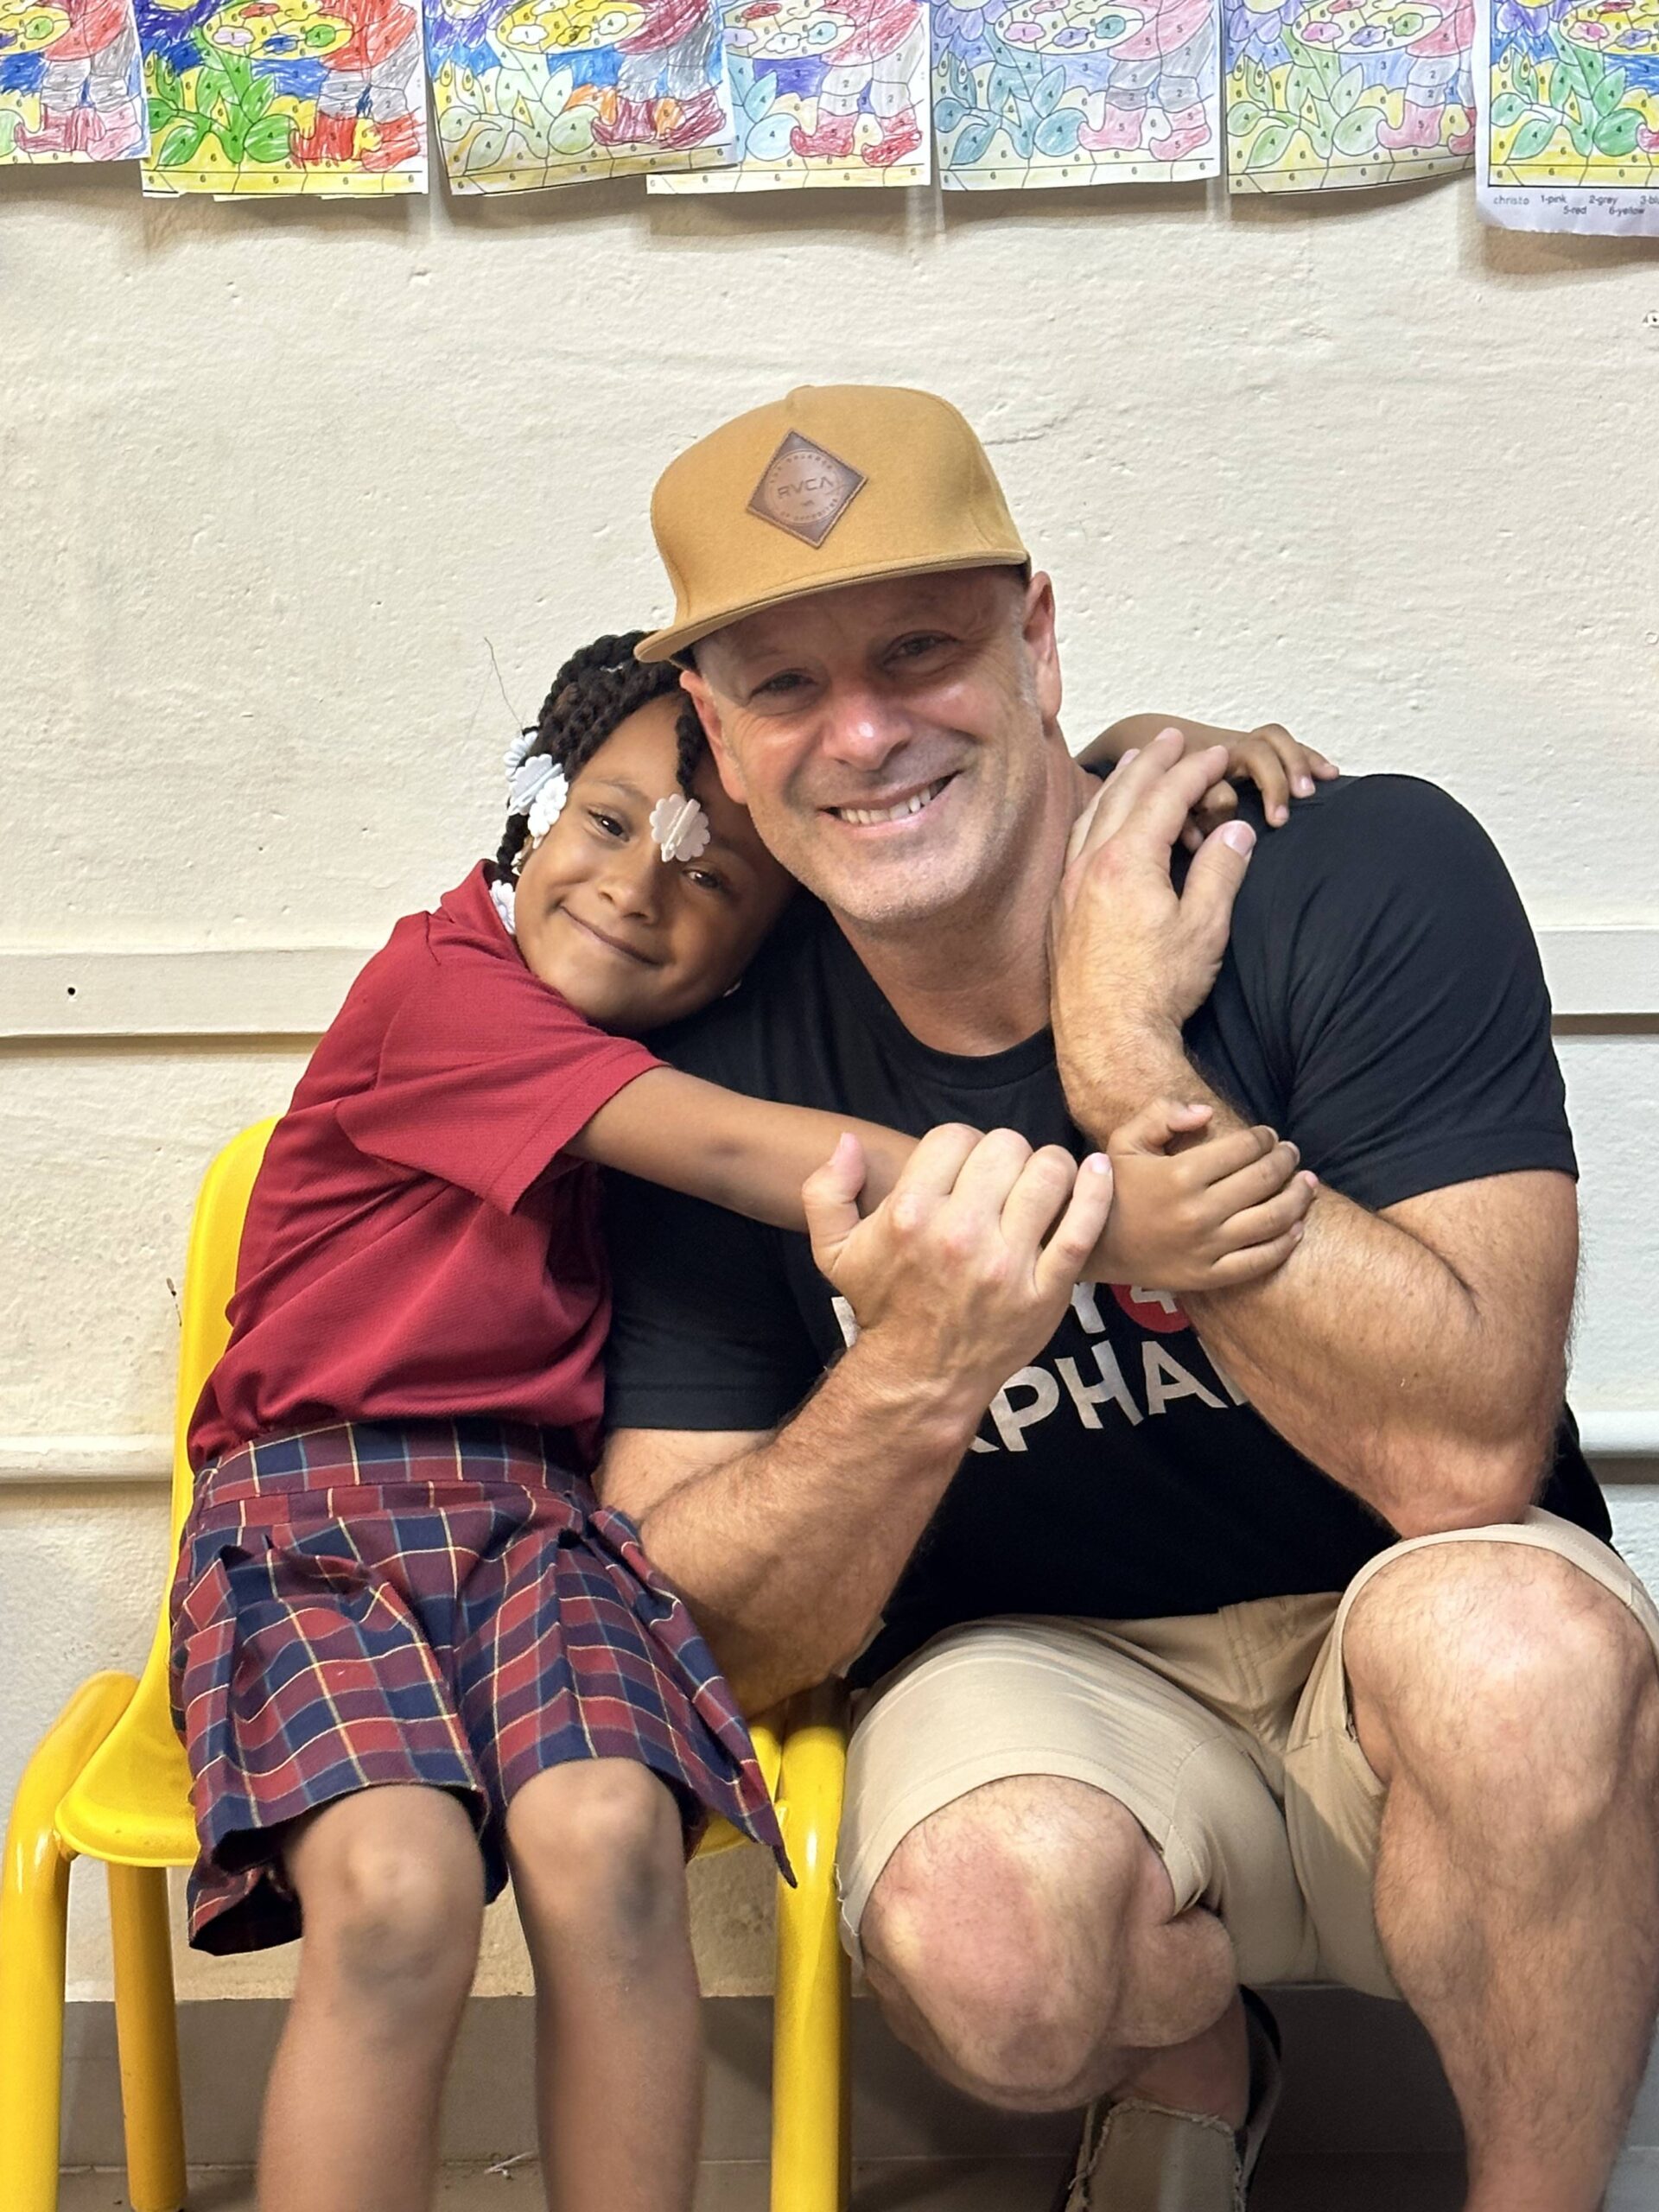 U4O founder Joe Brandi hugging a vulnerable child while they’re both smiling.